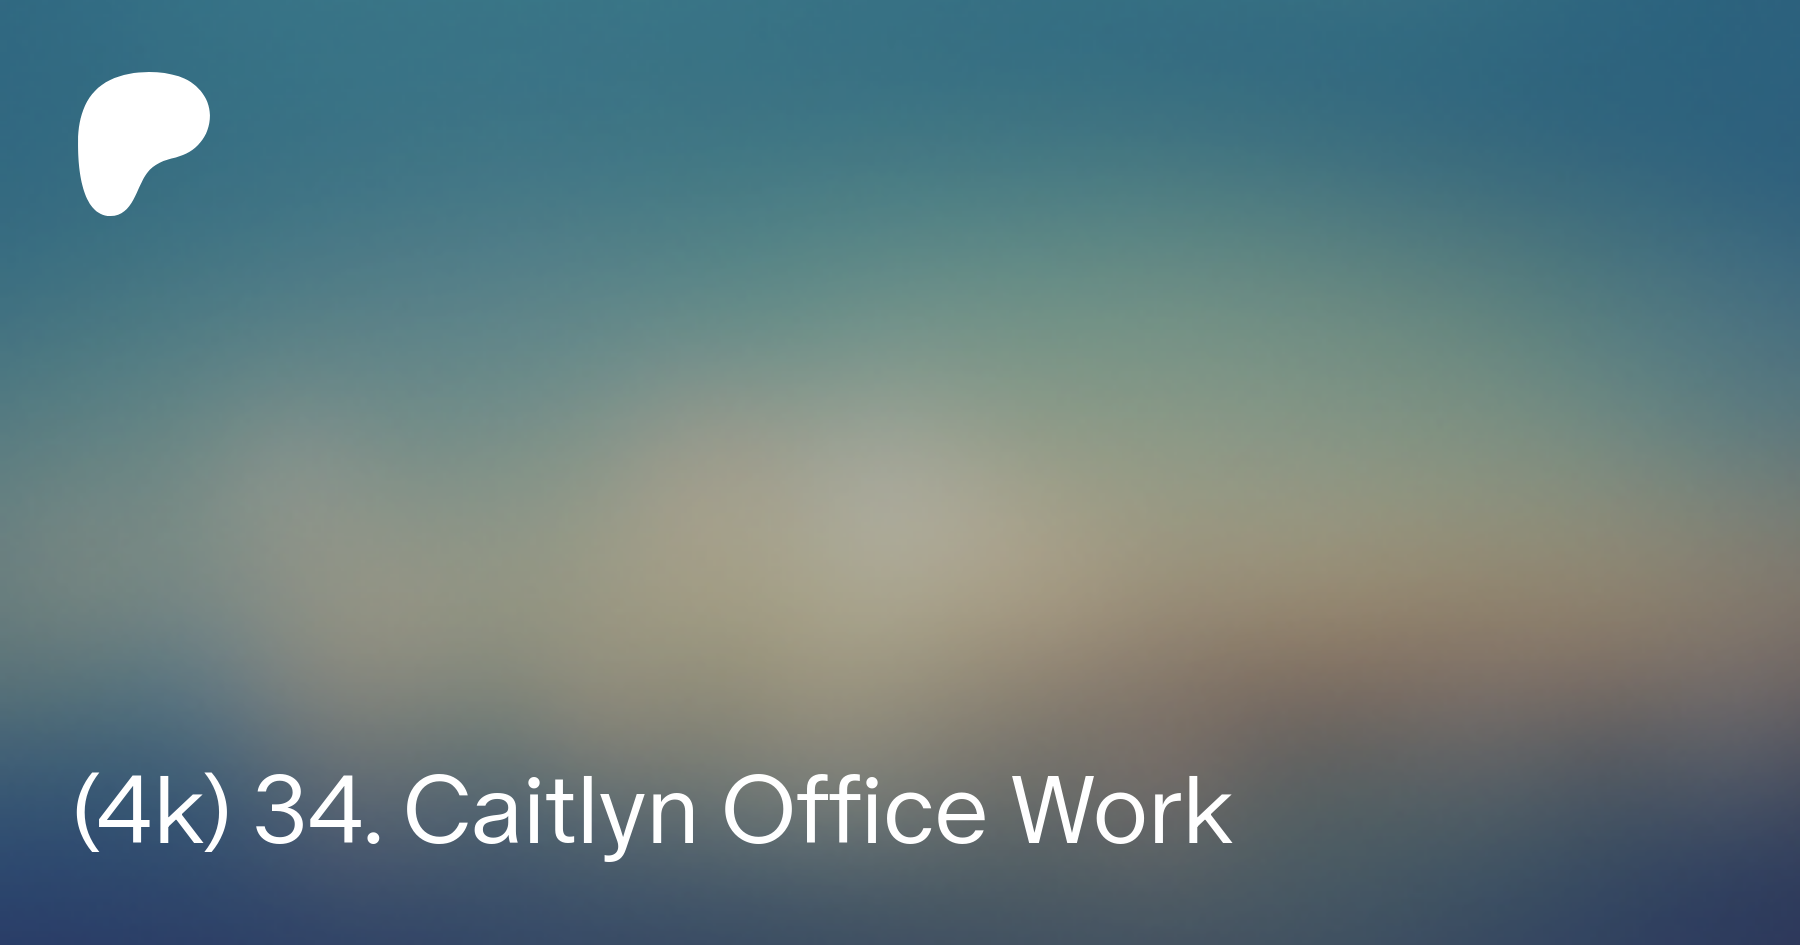 Caitlyns office work by shido